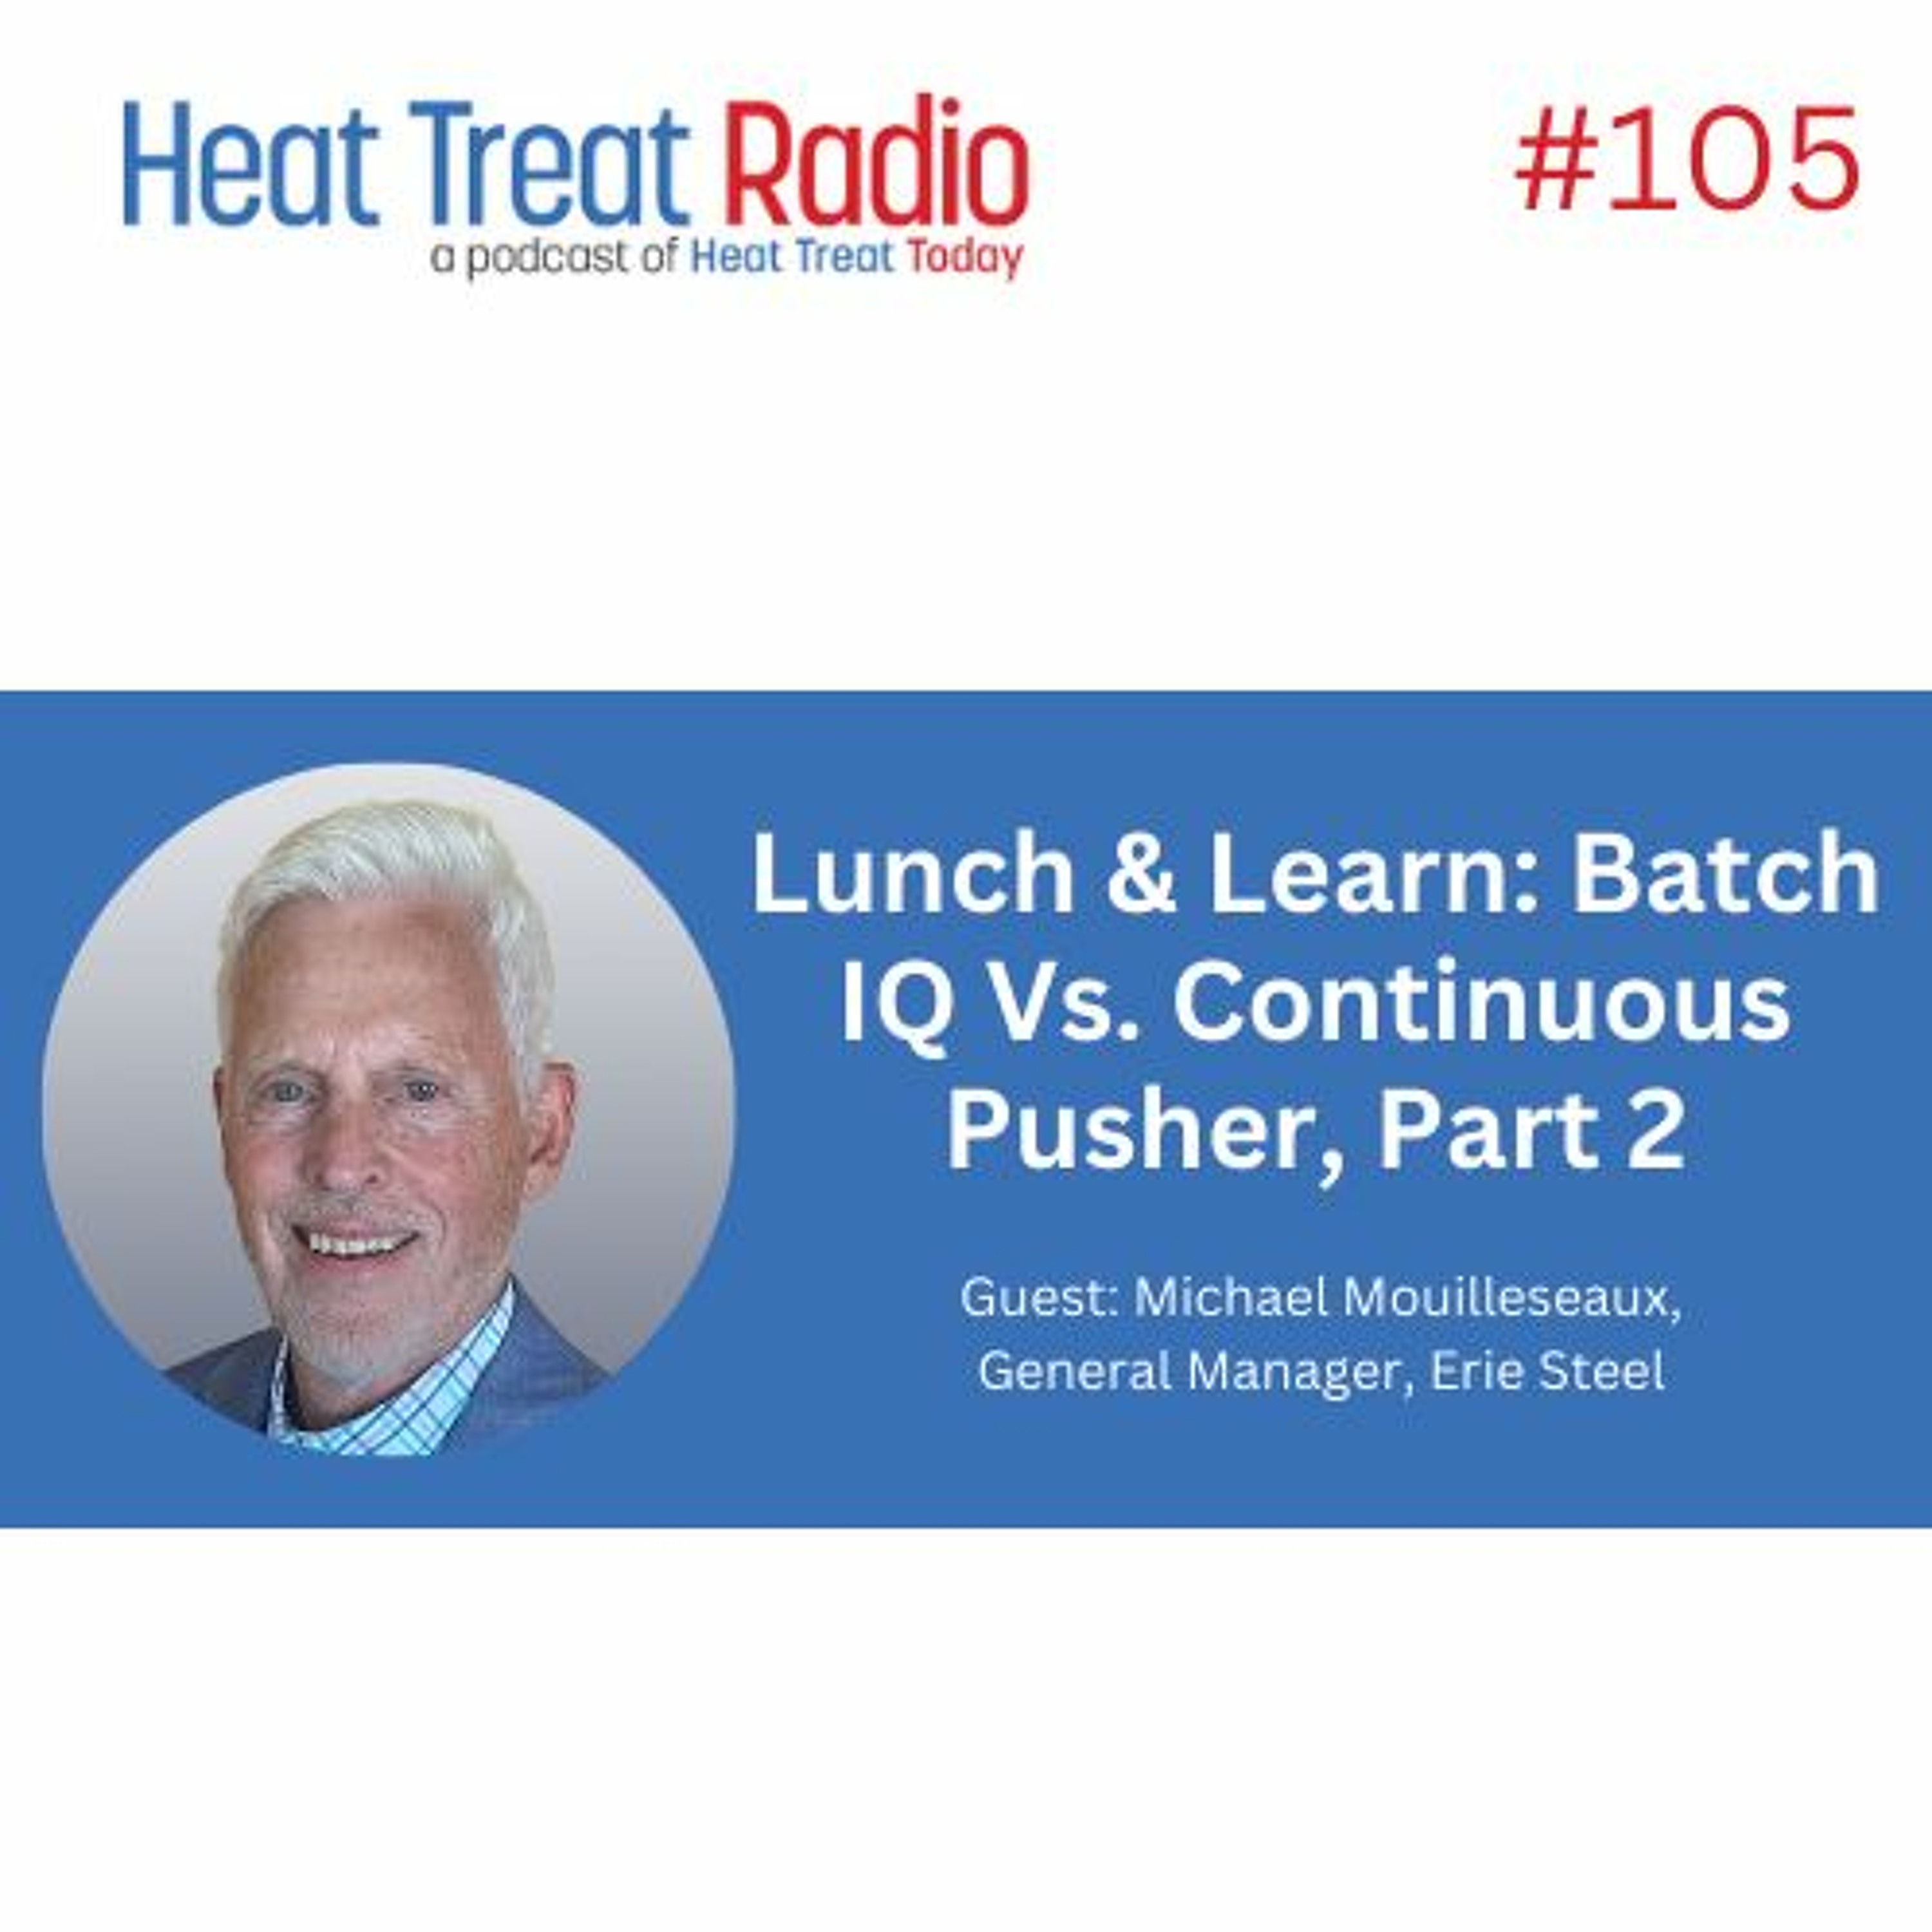 Heat Treat Radio #105: Lunch & Learn, Batch IQ Vs. Continuous Pusher, Part 2